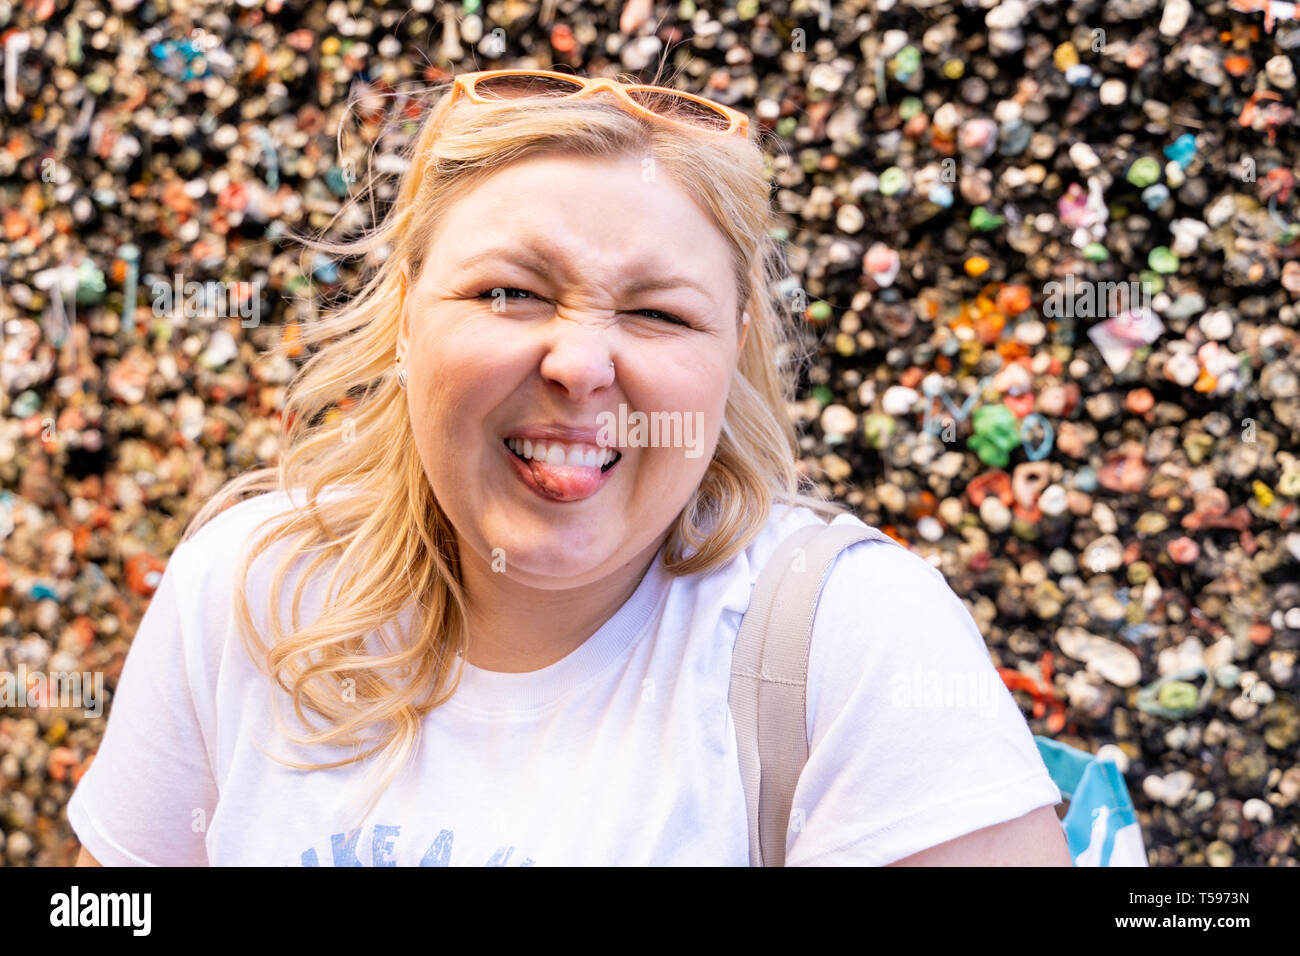 Blonde woman makes a gross face with her tounge out while visiting the Bubblegum Alley wall in San Luis Obispo California Stock Photo